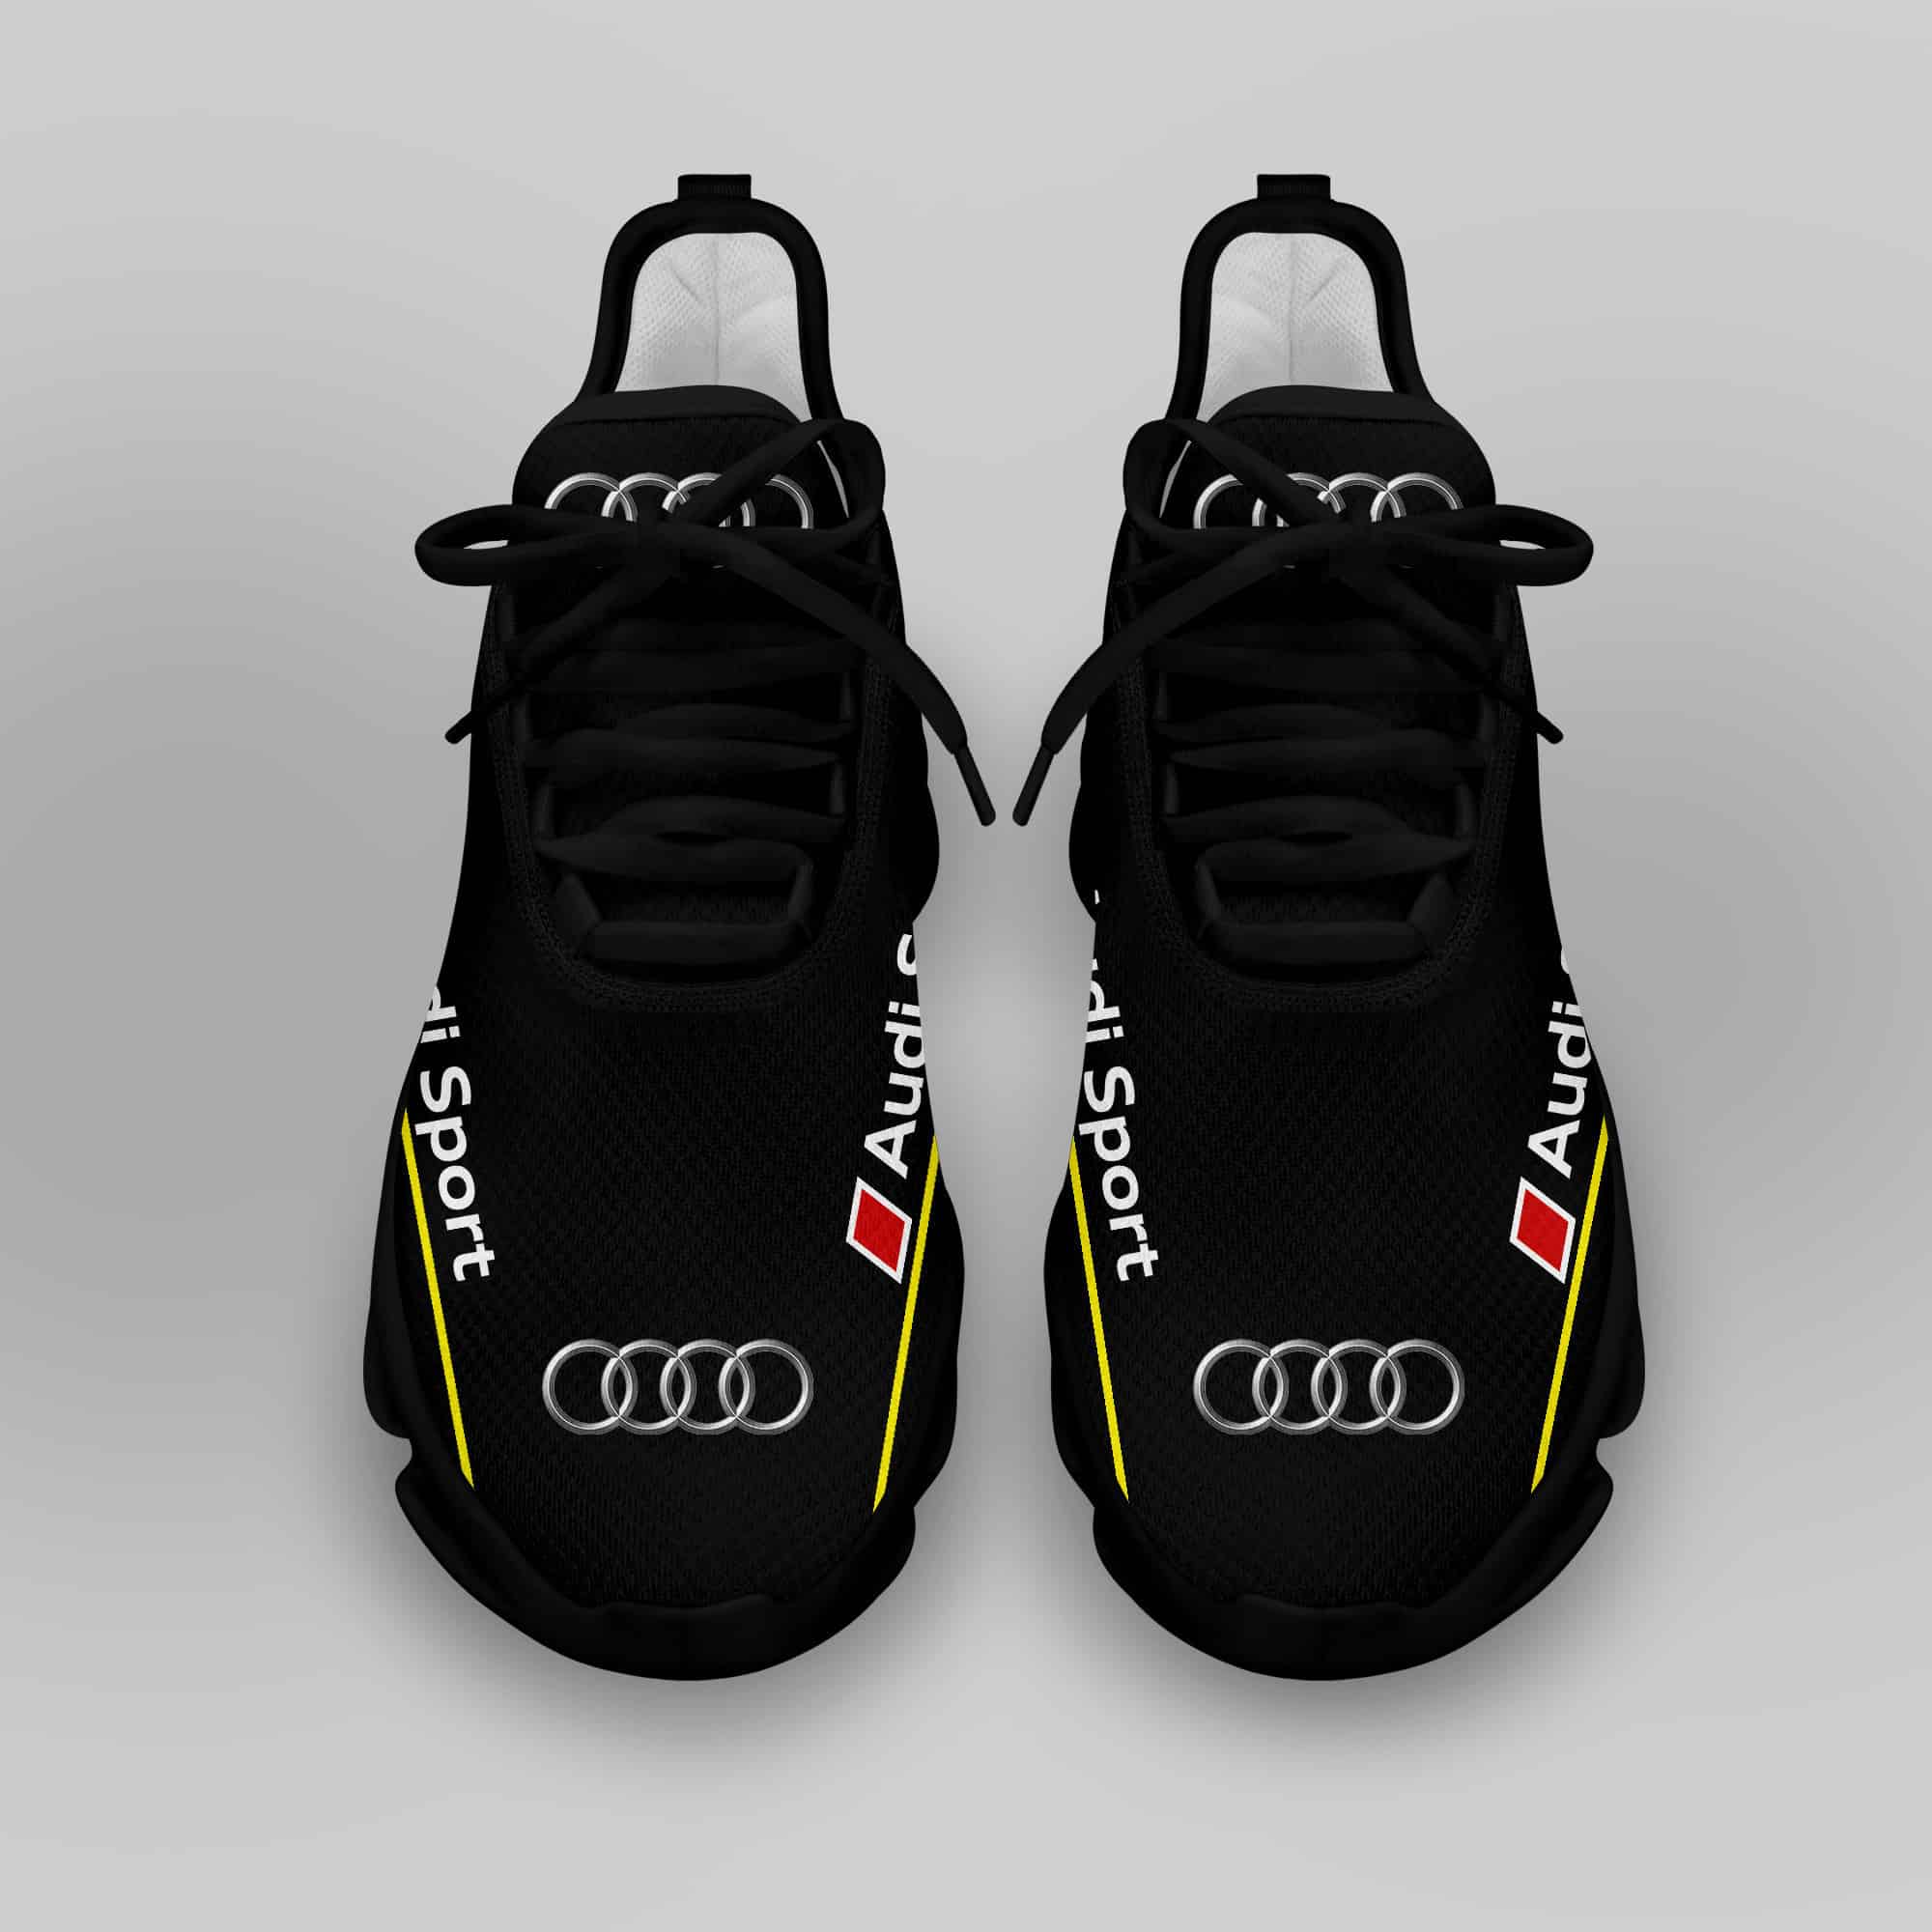 Audi Sport Running Shoes Max Soul Shoes Sneakers Ver 38 4